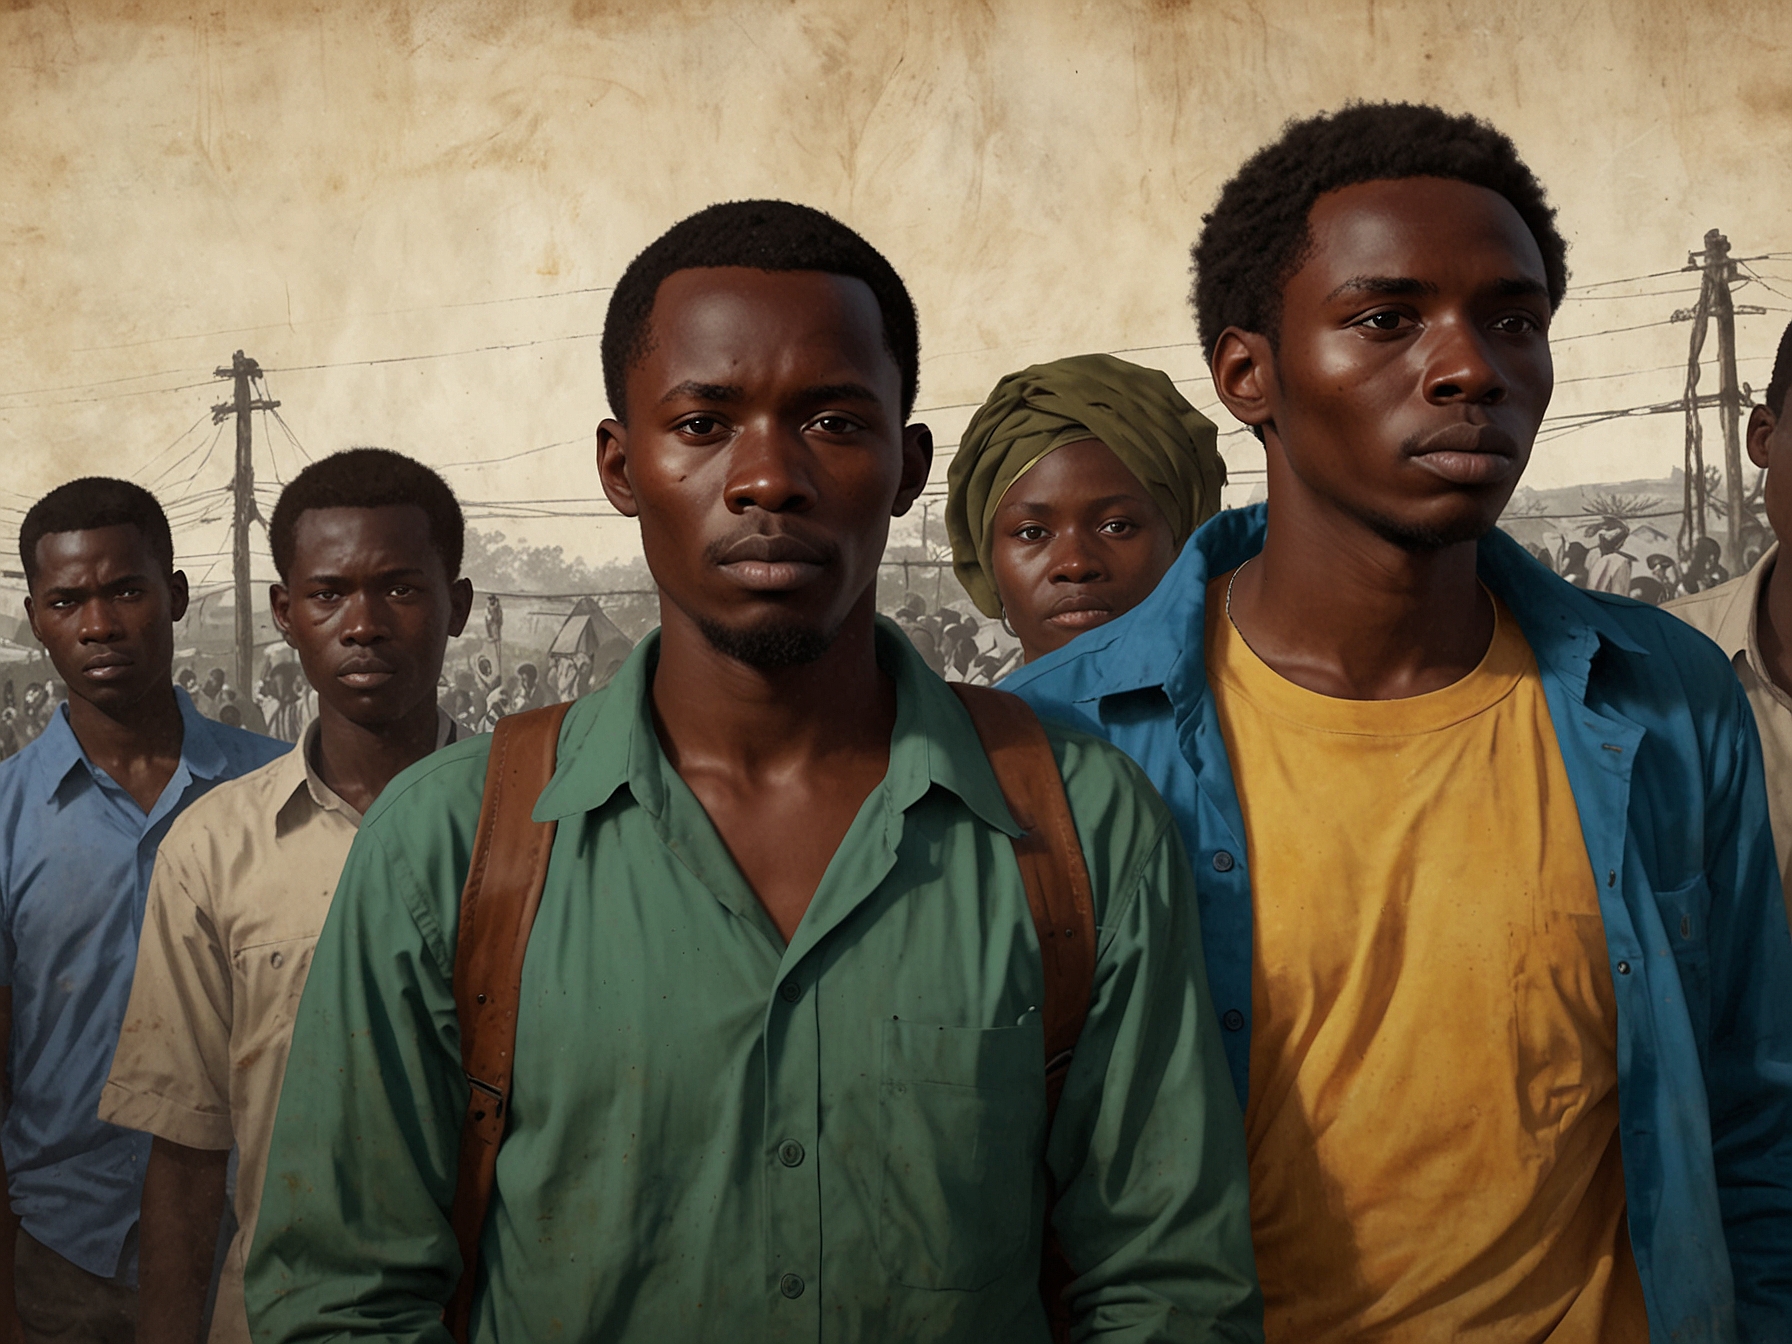 A group of asylum seekers in Rwanda, depicting the controversial policy that has sparked debate and highlighted divisions within the Conservative Party, as mentioned in James Sunderland's blunt criticism.